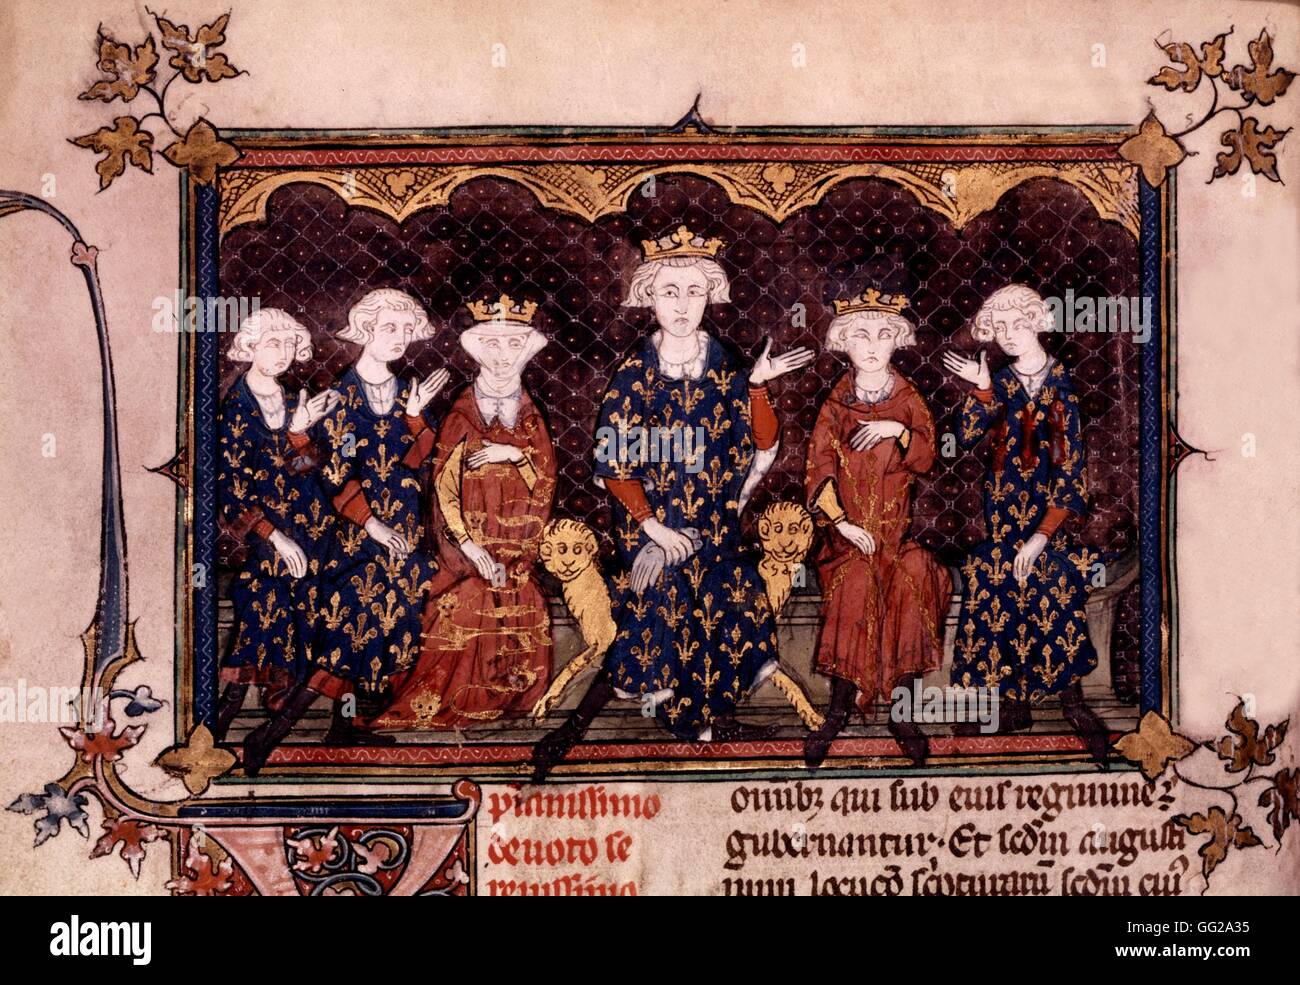 Philip IV The Fair and his children. (From l. to r.: Philip V, Charles IV, Isabelle, Louis X le Hutin (The Quarrelsome) and Charles of Valois 14th century France Stock Photo